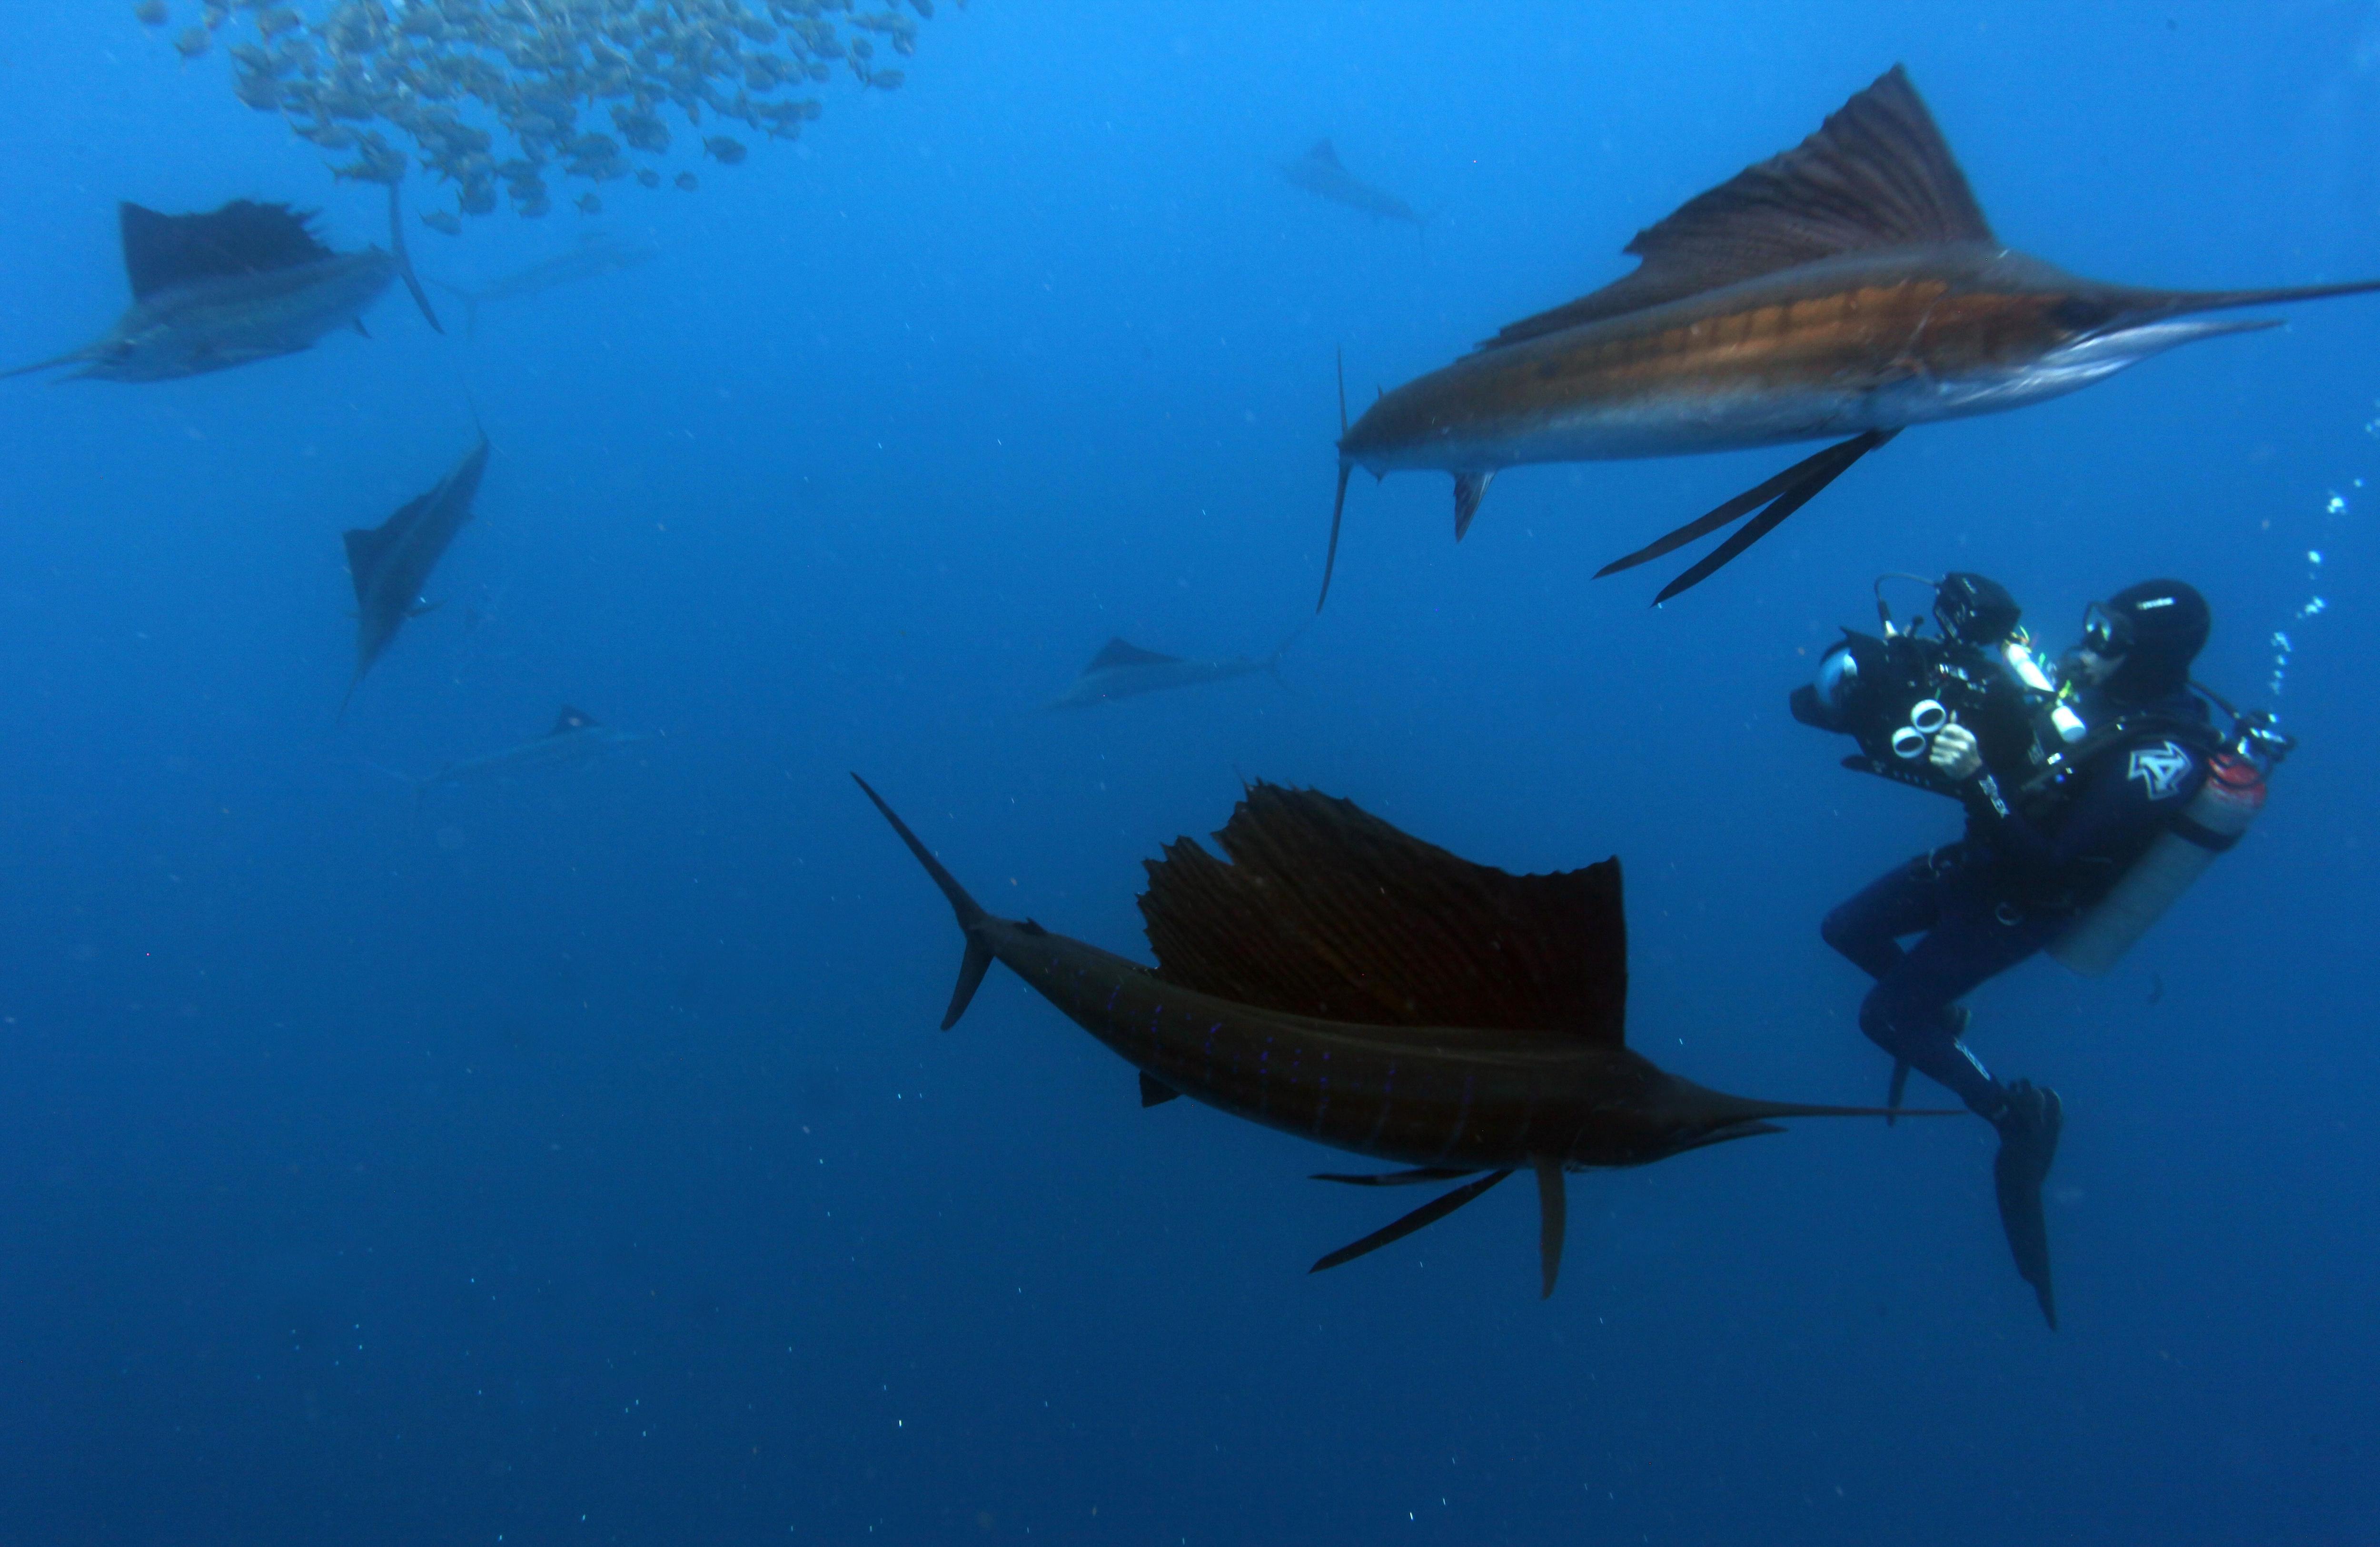 A scuba diver with a camera swims in front of two sailfish.